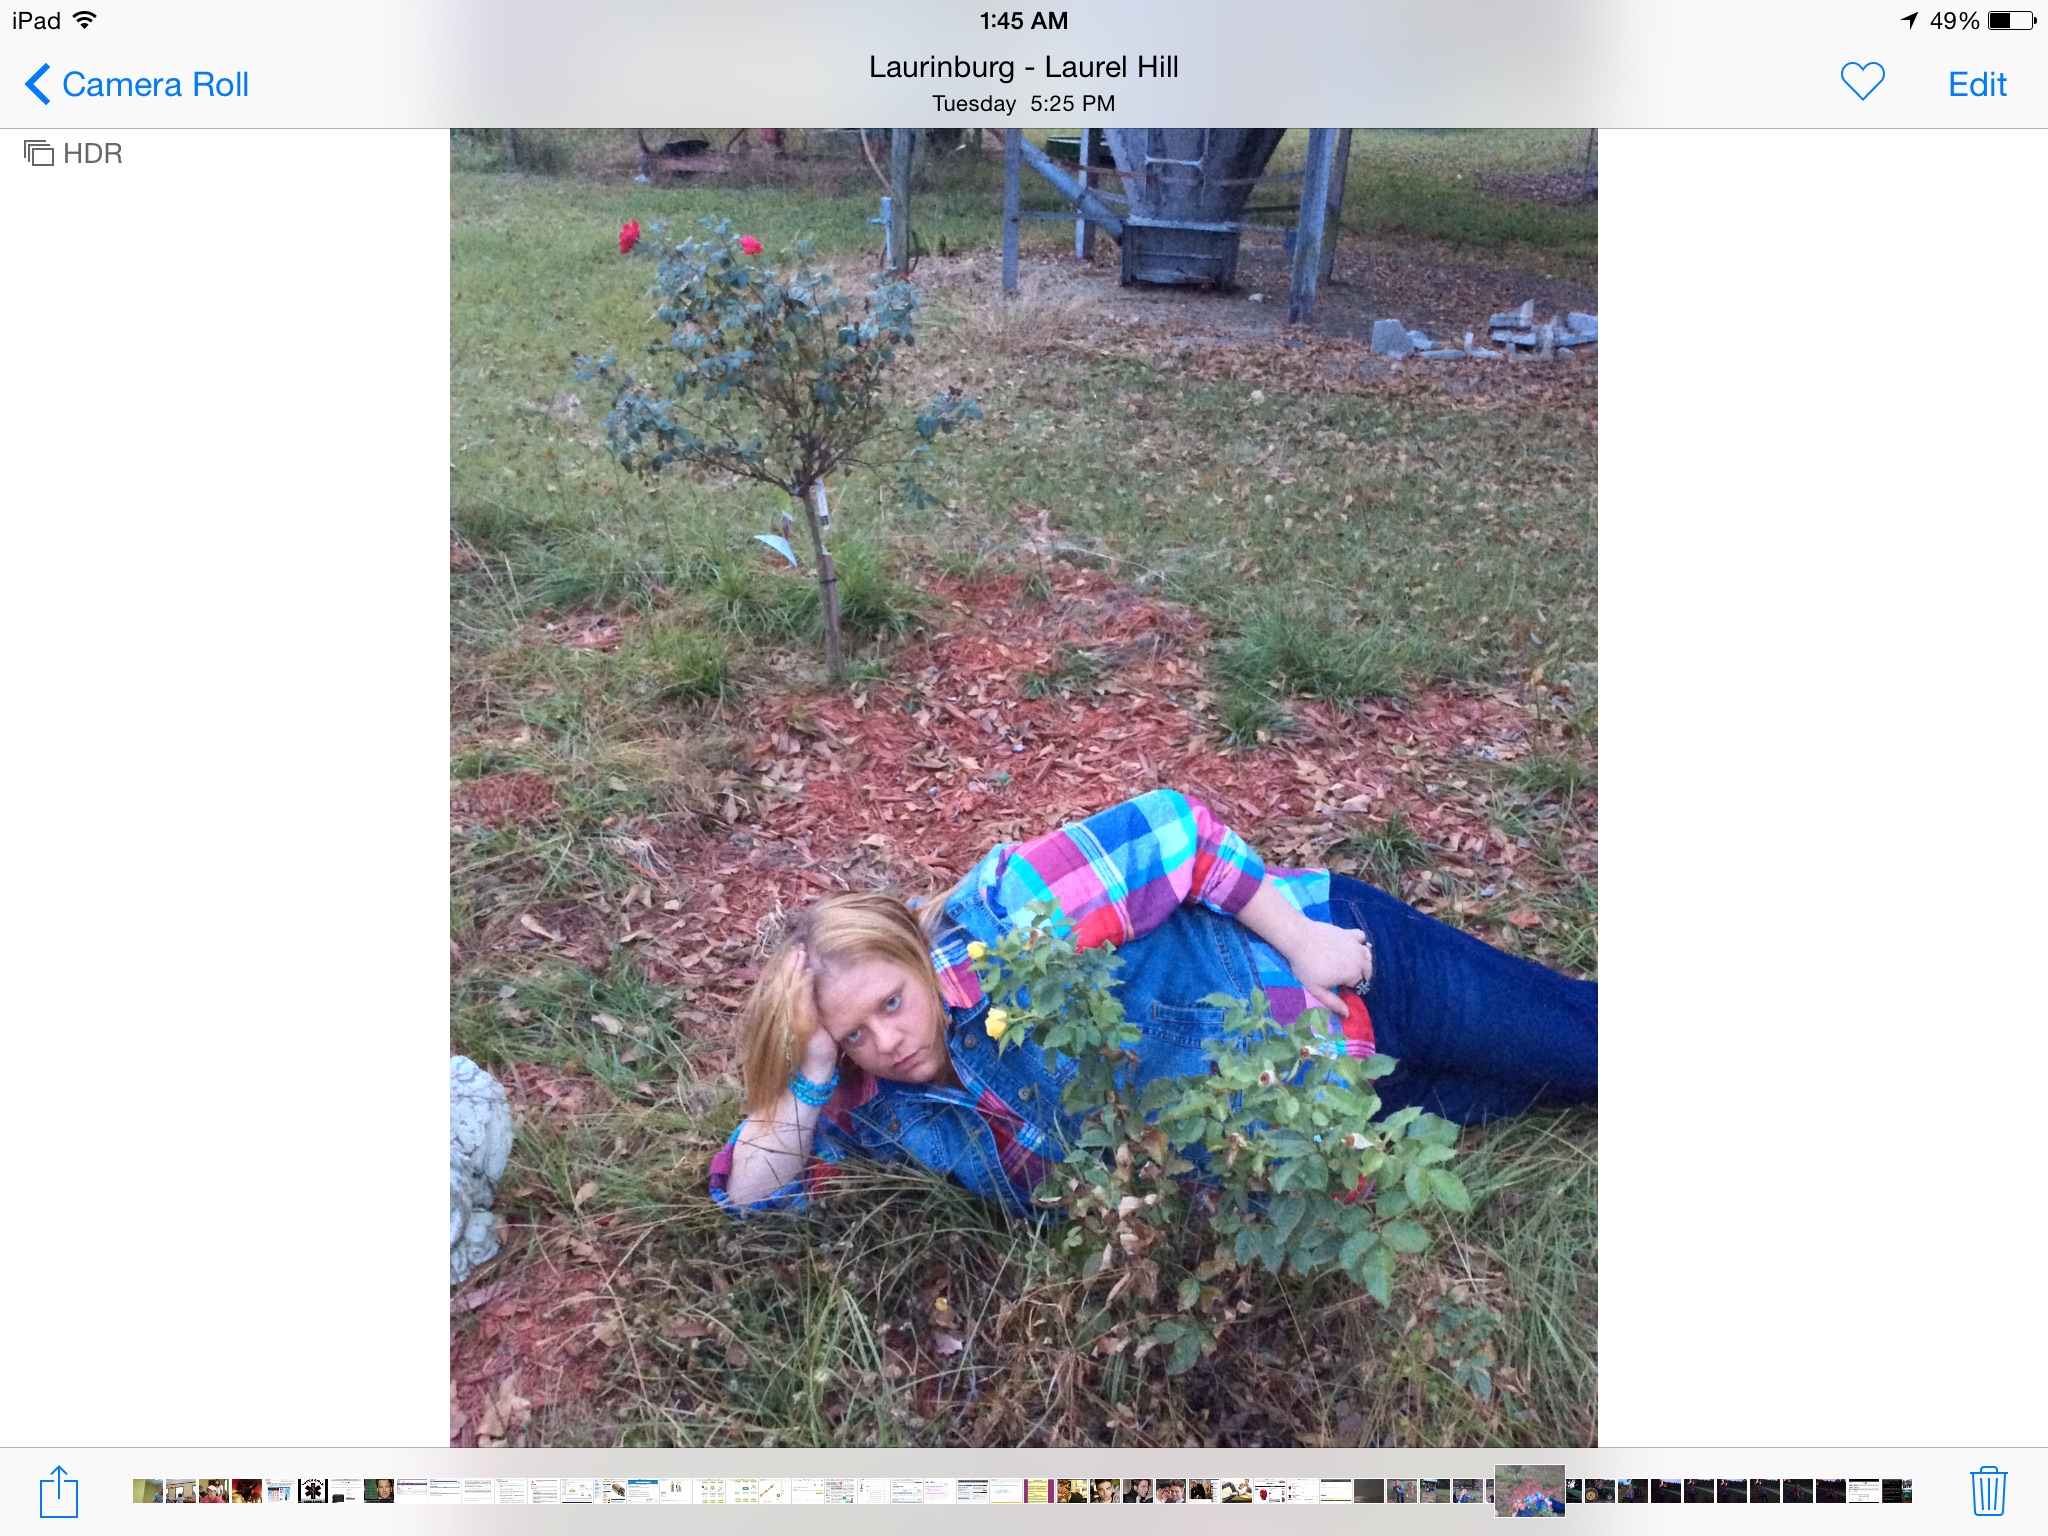 Myself in my rose garden(that needs serious weeding)the first week of November 2014